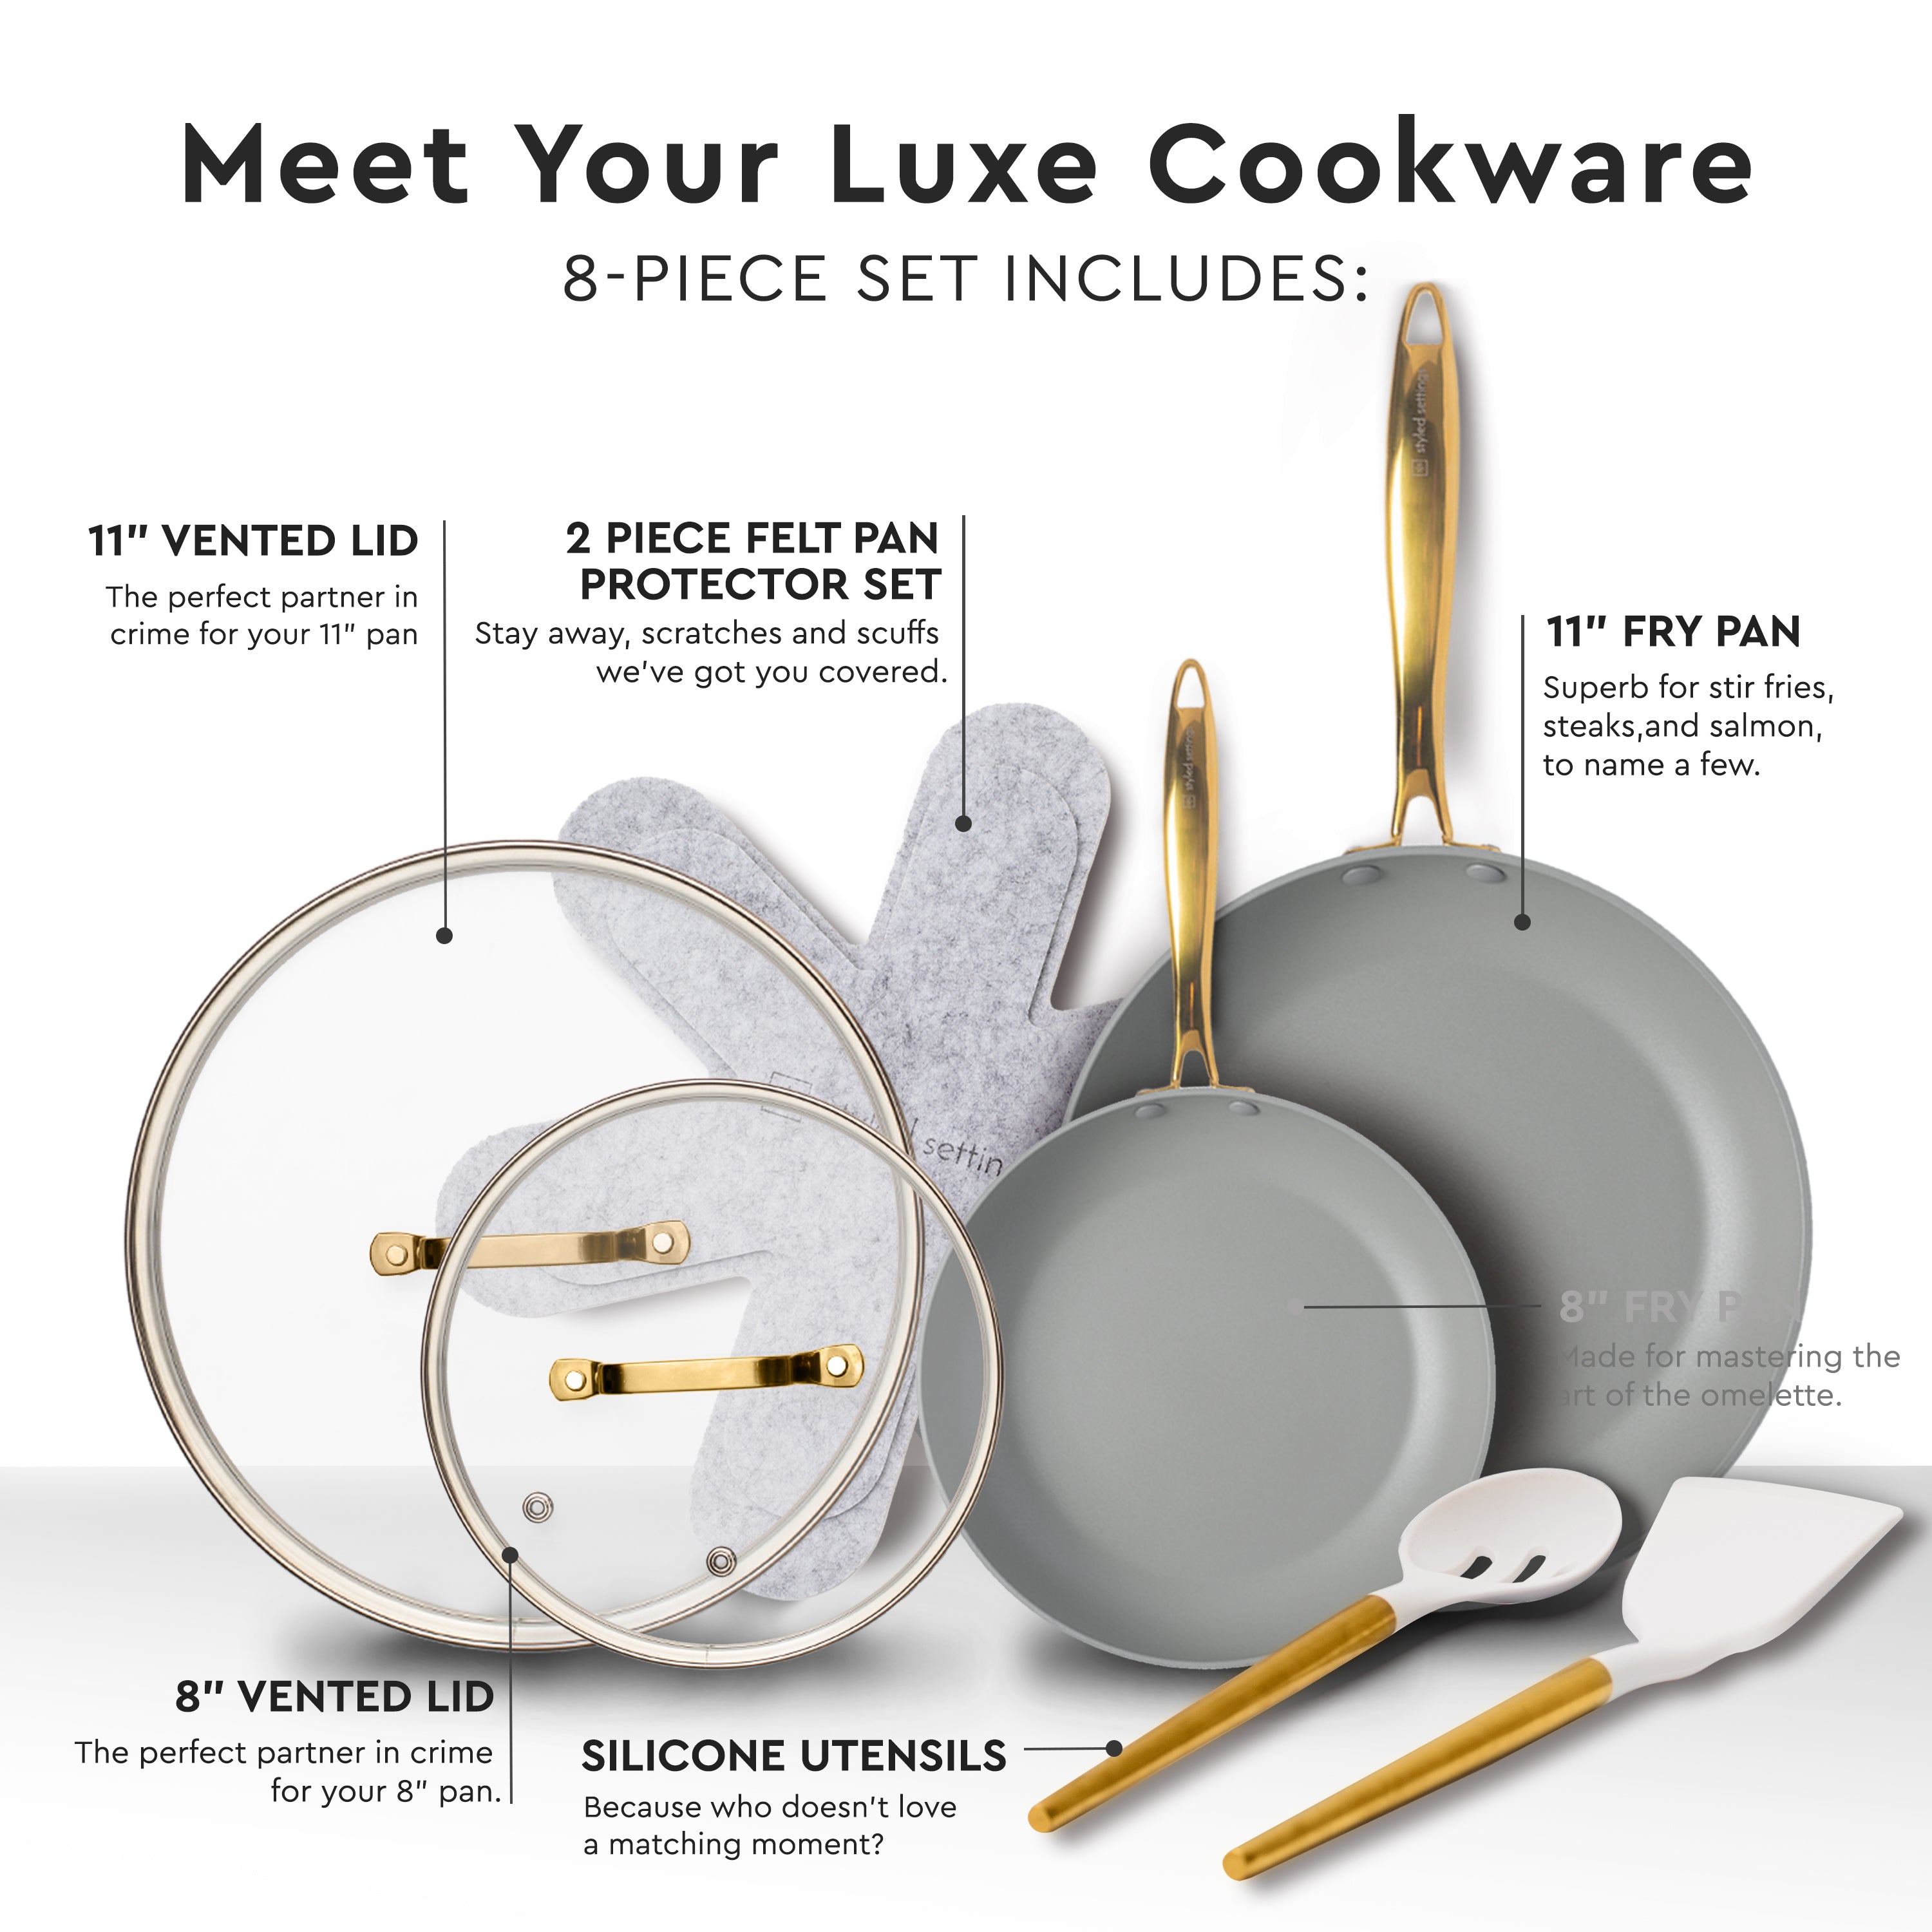 Styled Settings STYLED SETTINGS White and Gold Cooking Utensils